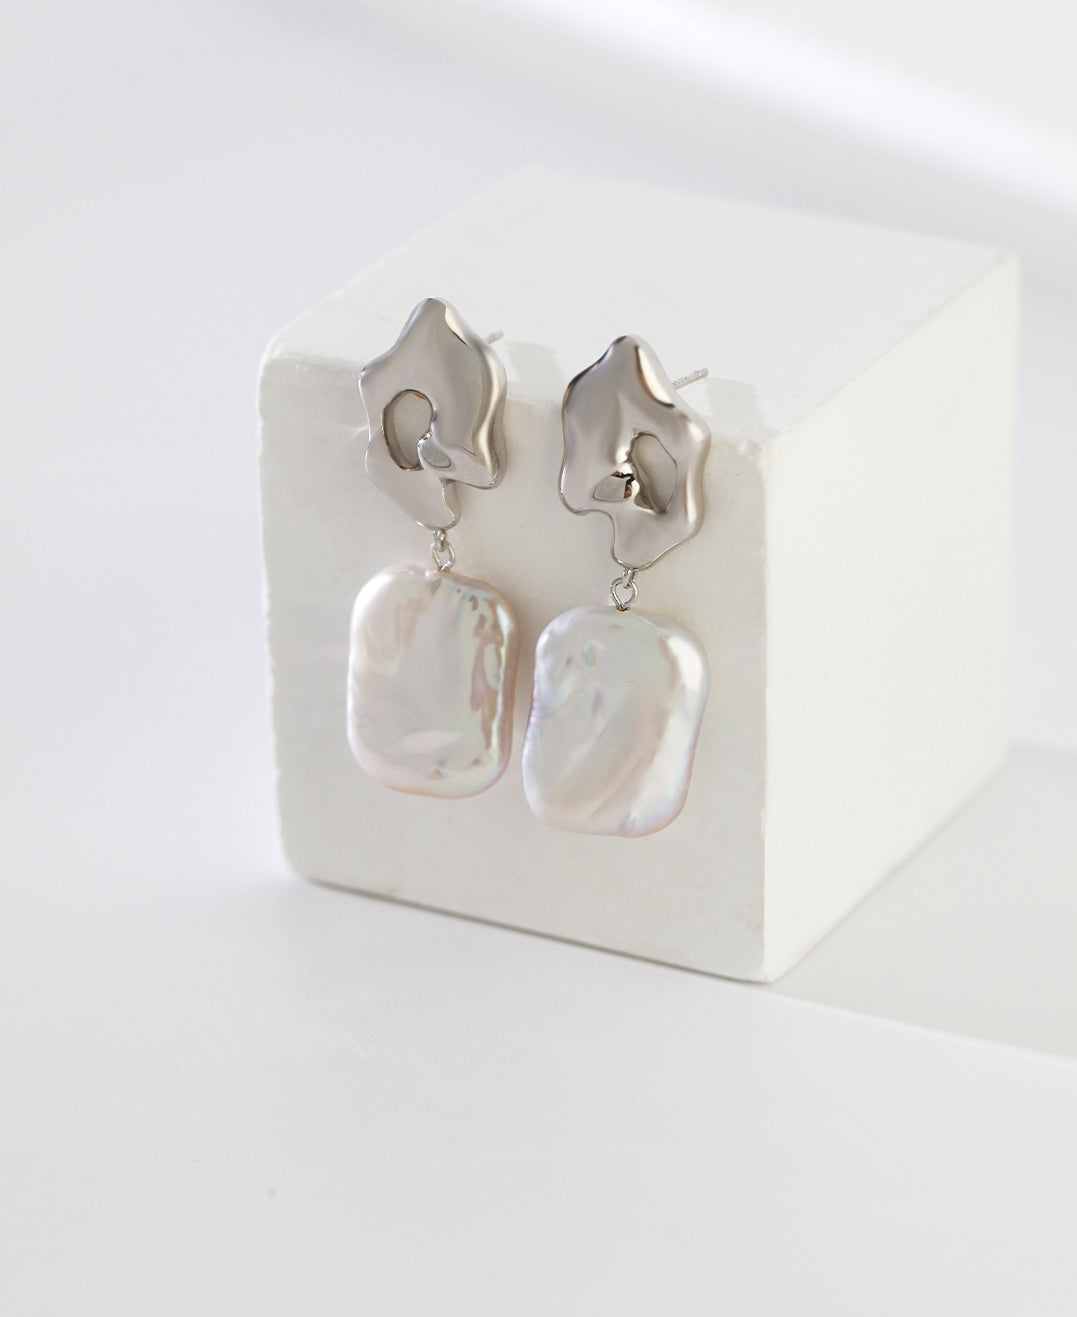 Elegant Sterling Silver Baroque Pearl Earrings: A Fusion of Artistry and Rarity